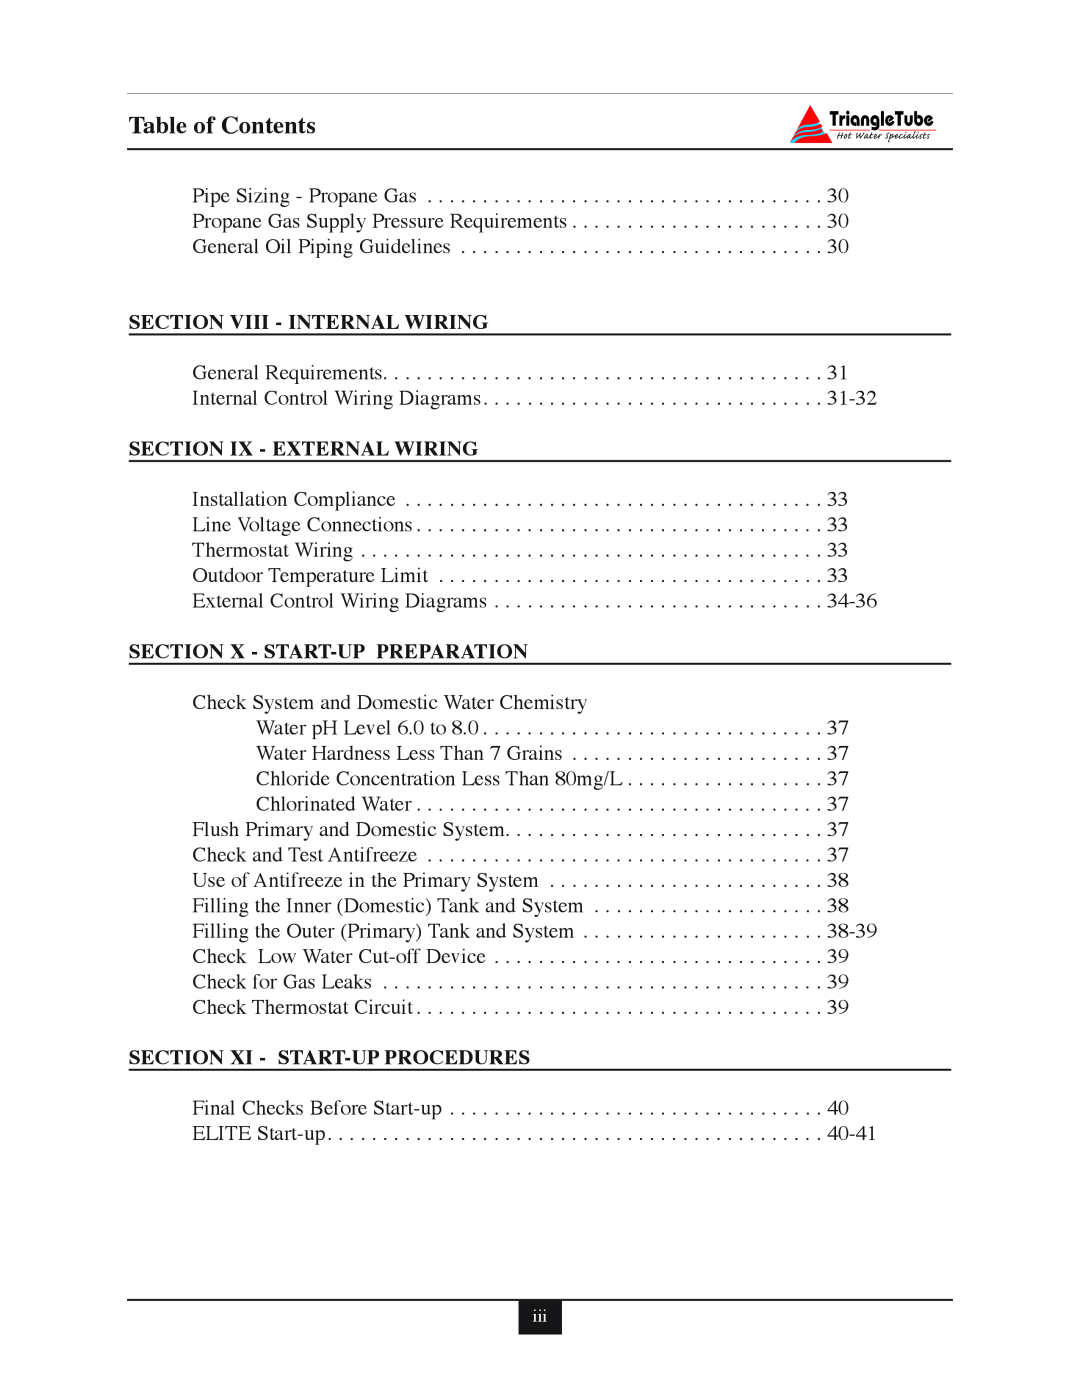 Delta 40 Table of Contents, Section Viii - Internal Wiring, Section Ix - External Wiring, Section X - Start-Uppreparation 